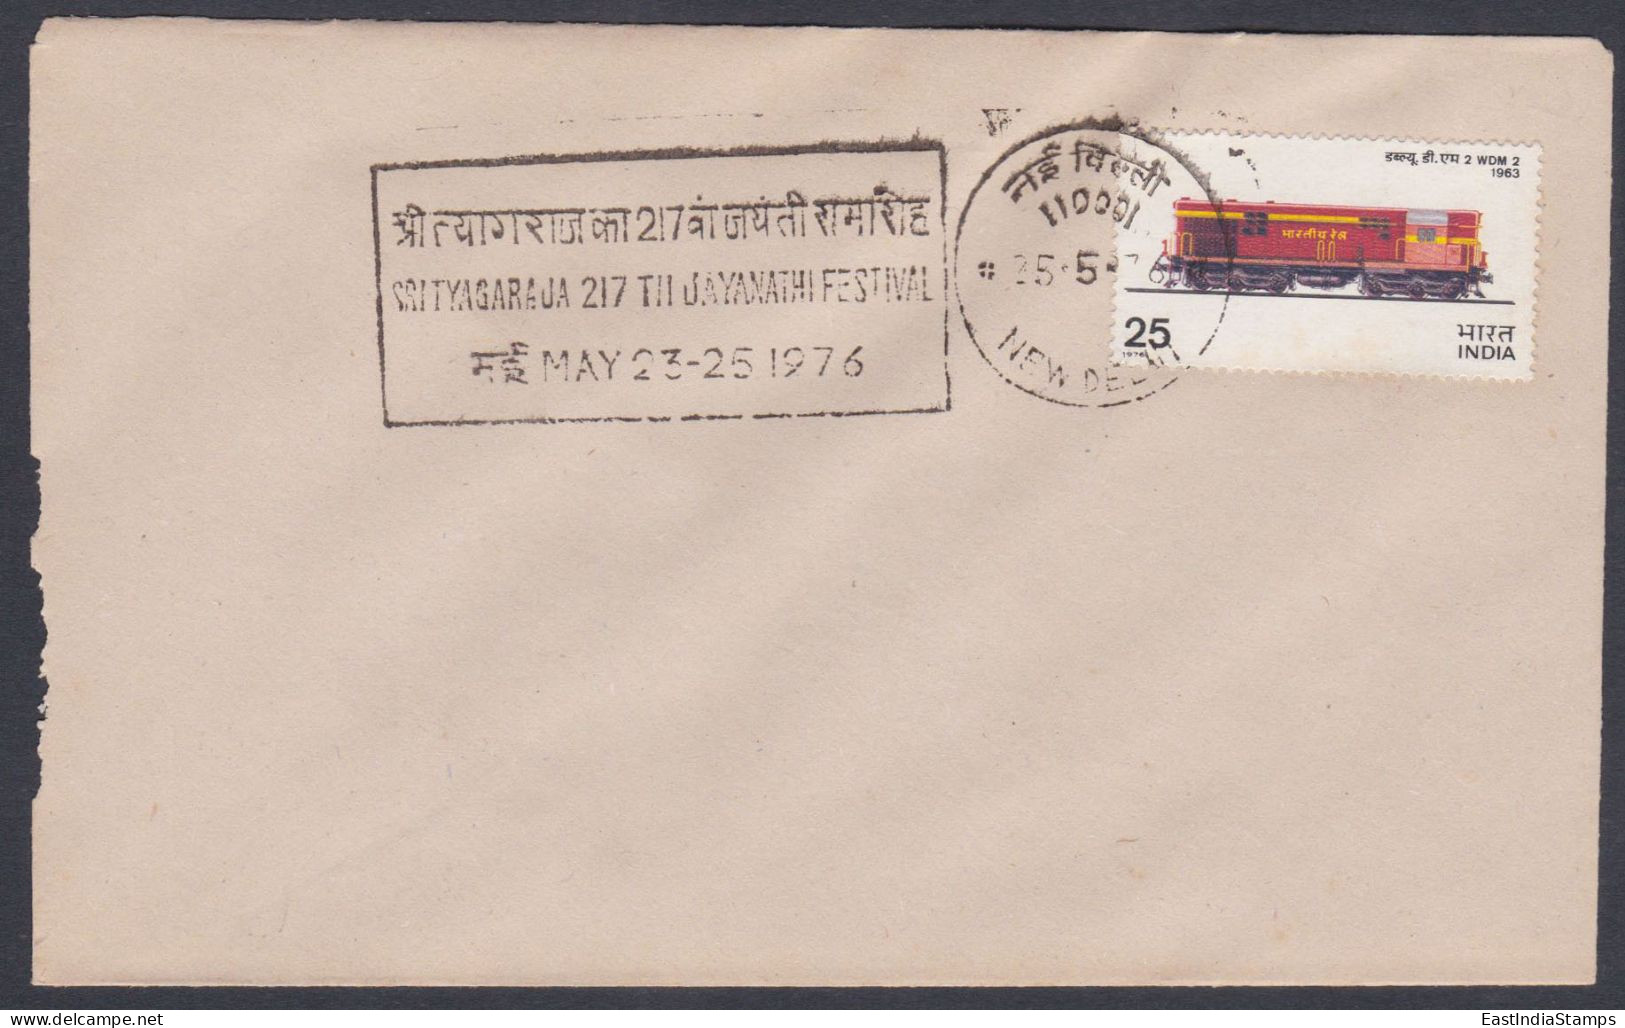 Inde India 1976 Special Cover Sri Tyagraja Festival, Hinduism, Hindu, Religion, Spirituality, Train - Covers & Documents